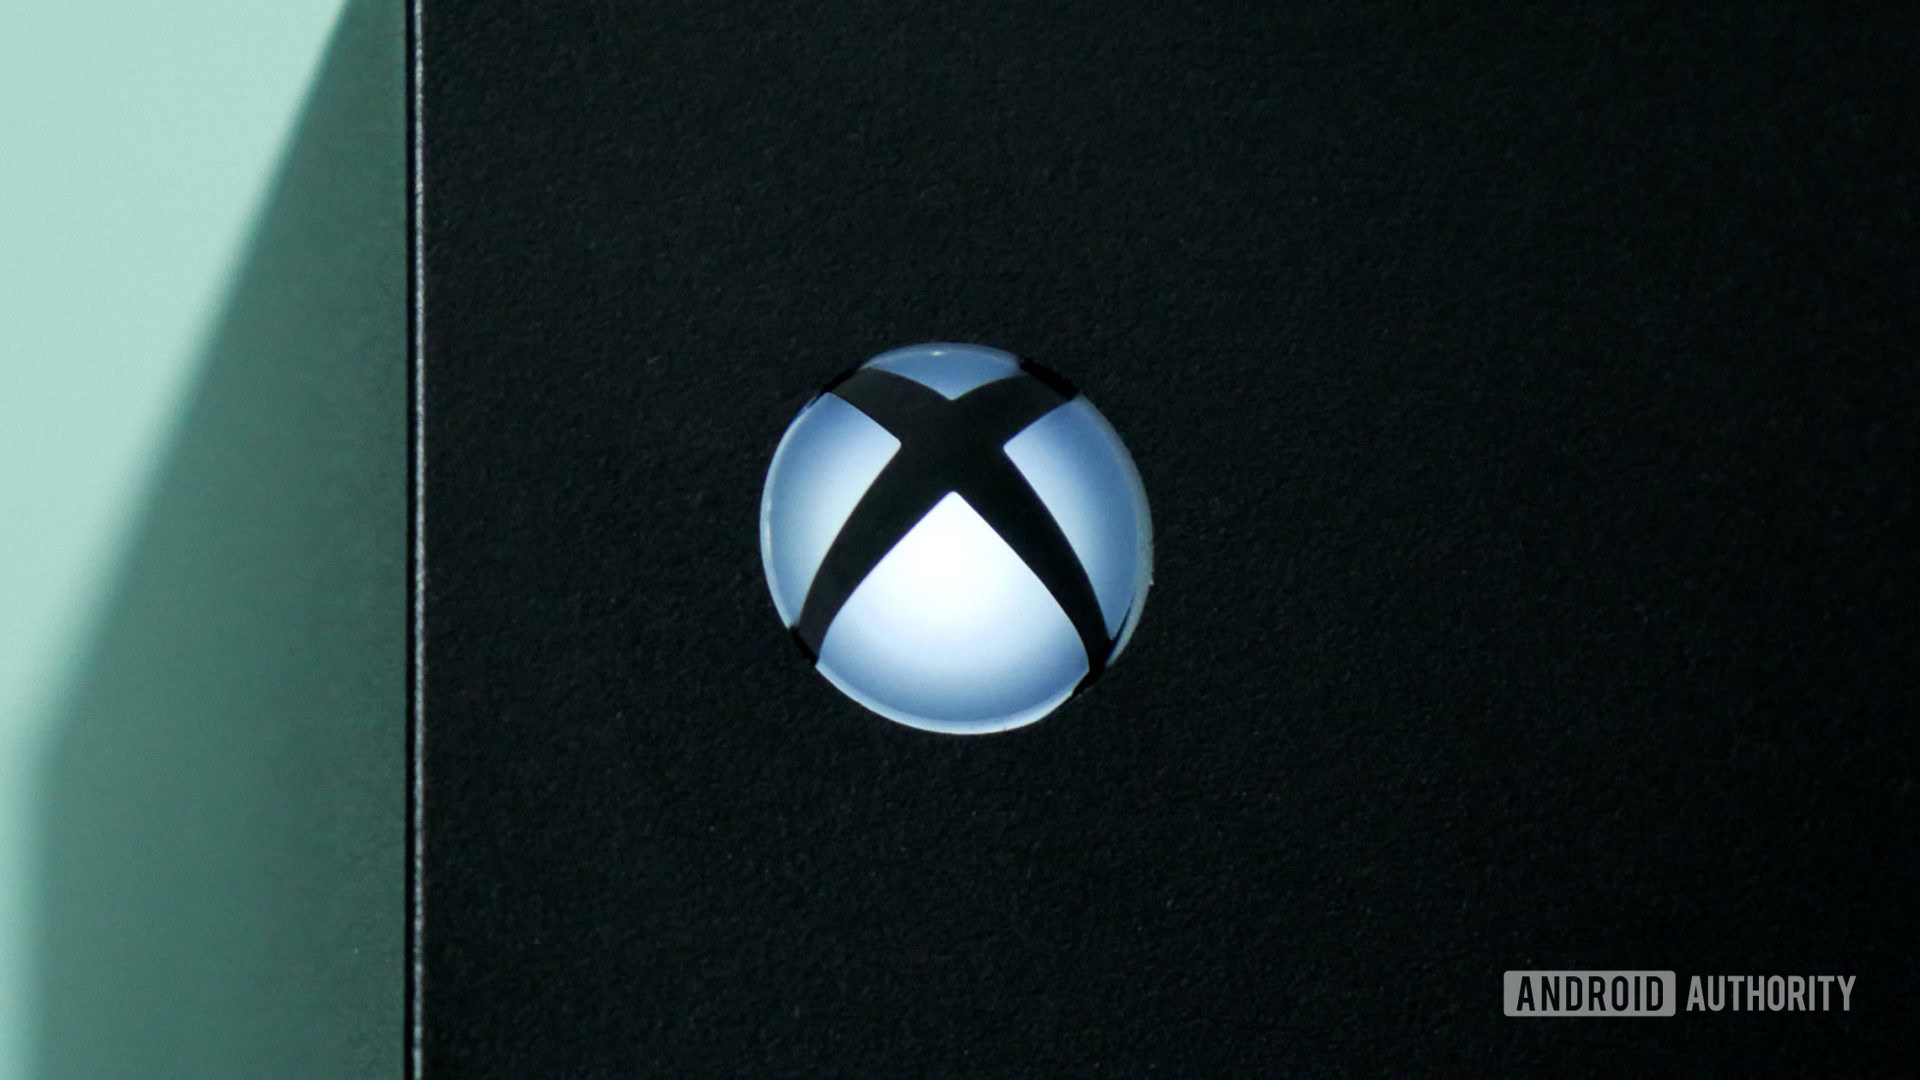 Microsoft Xbox mobile store coming soon- Big challenge for Google